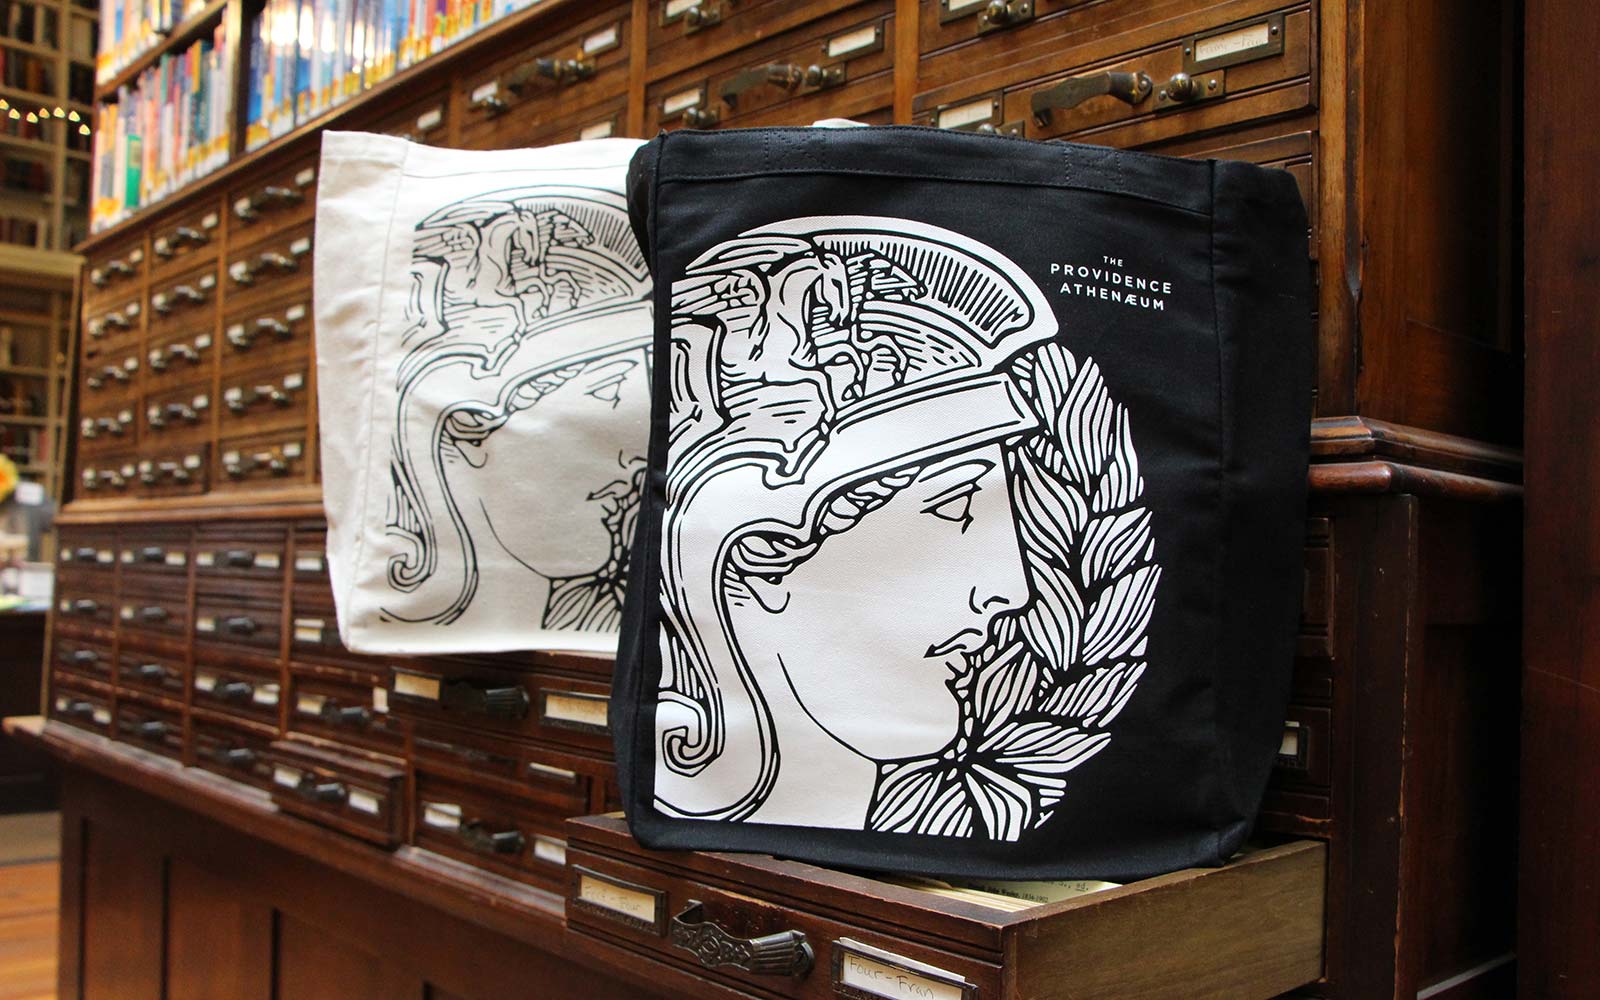 Photo of tote bags designed for the Providence Athenaeum